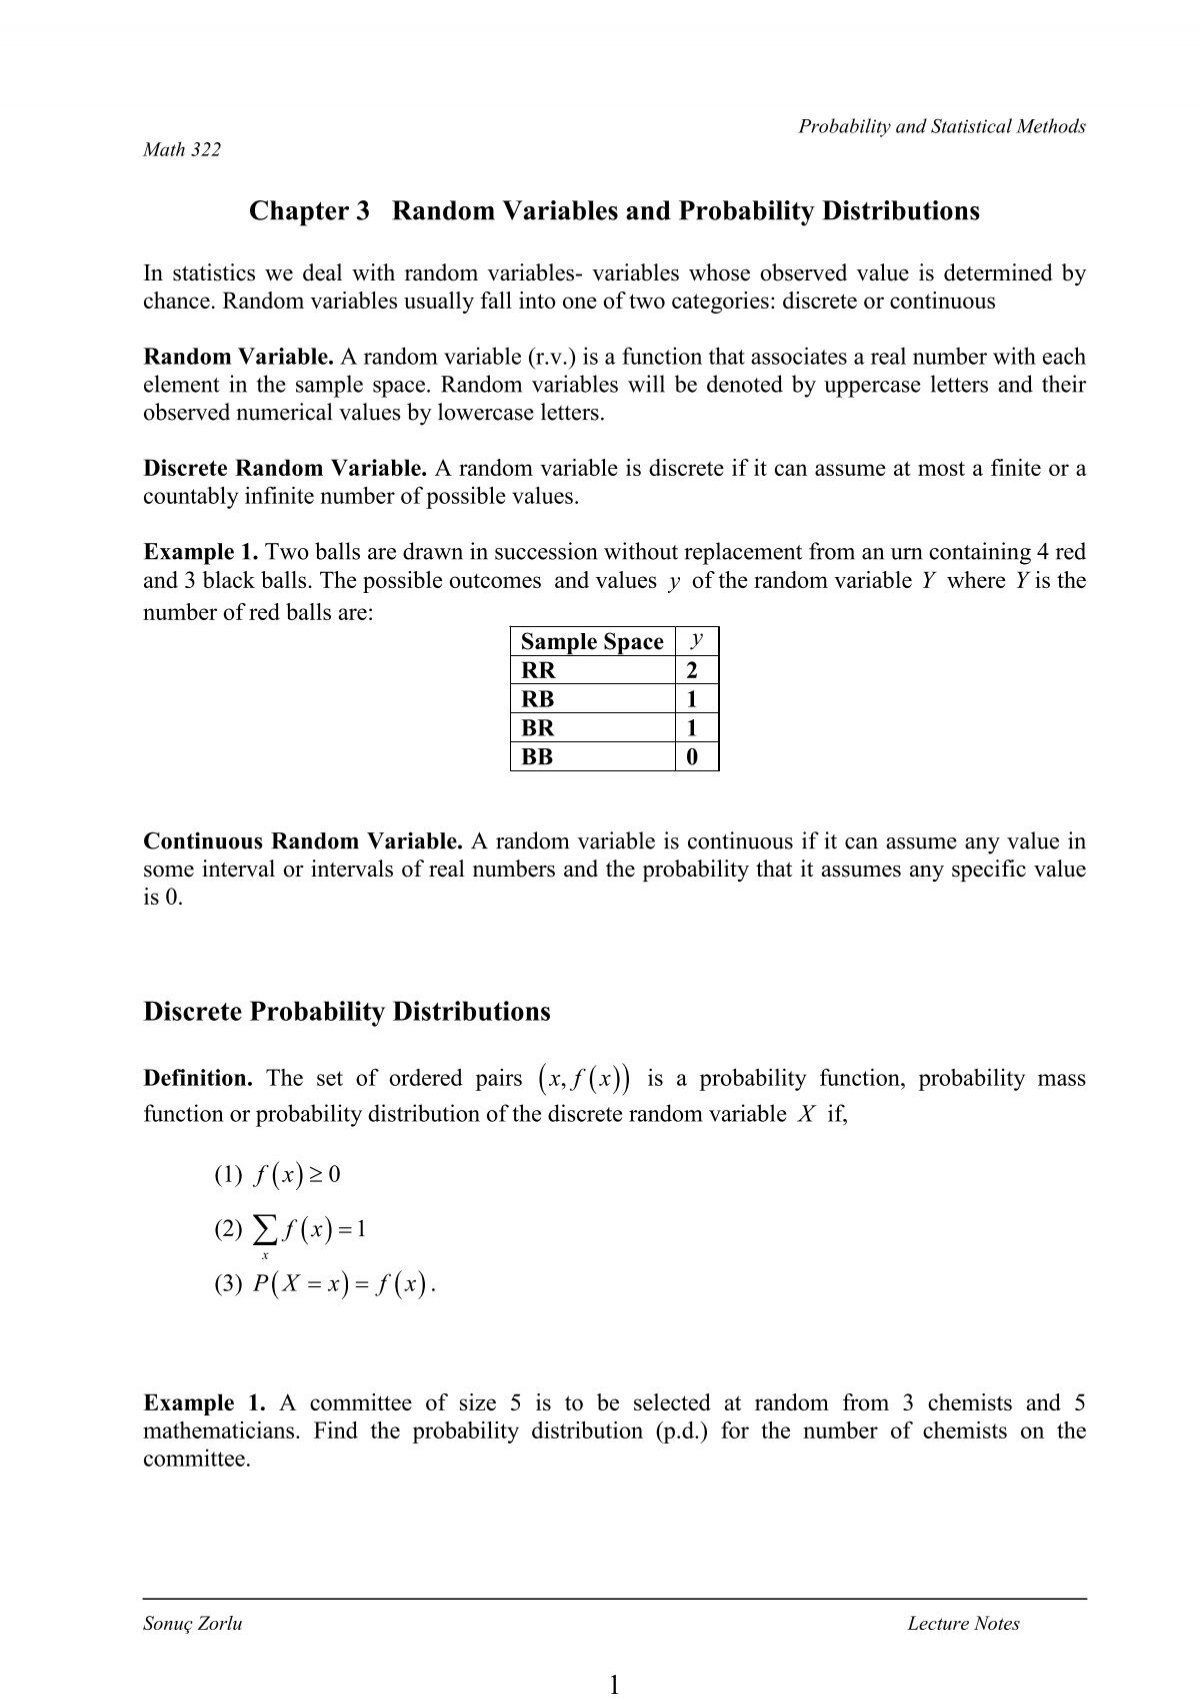 Chapter 3 Random Variables And Probability Distributions